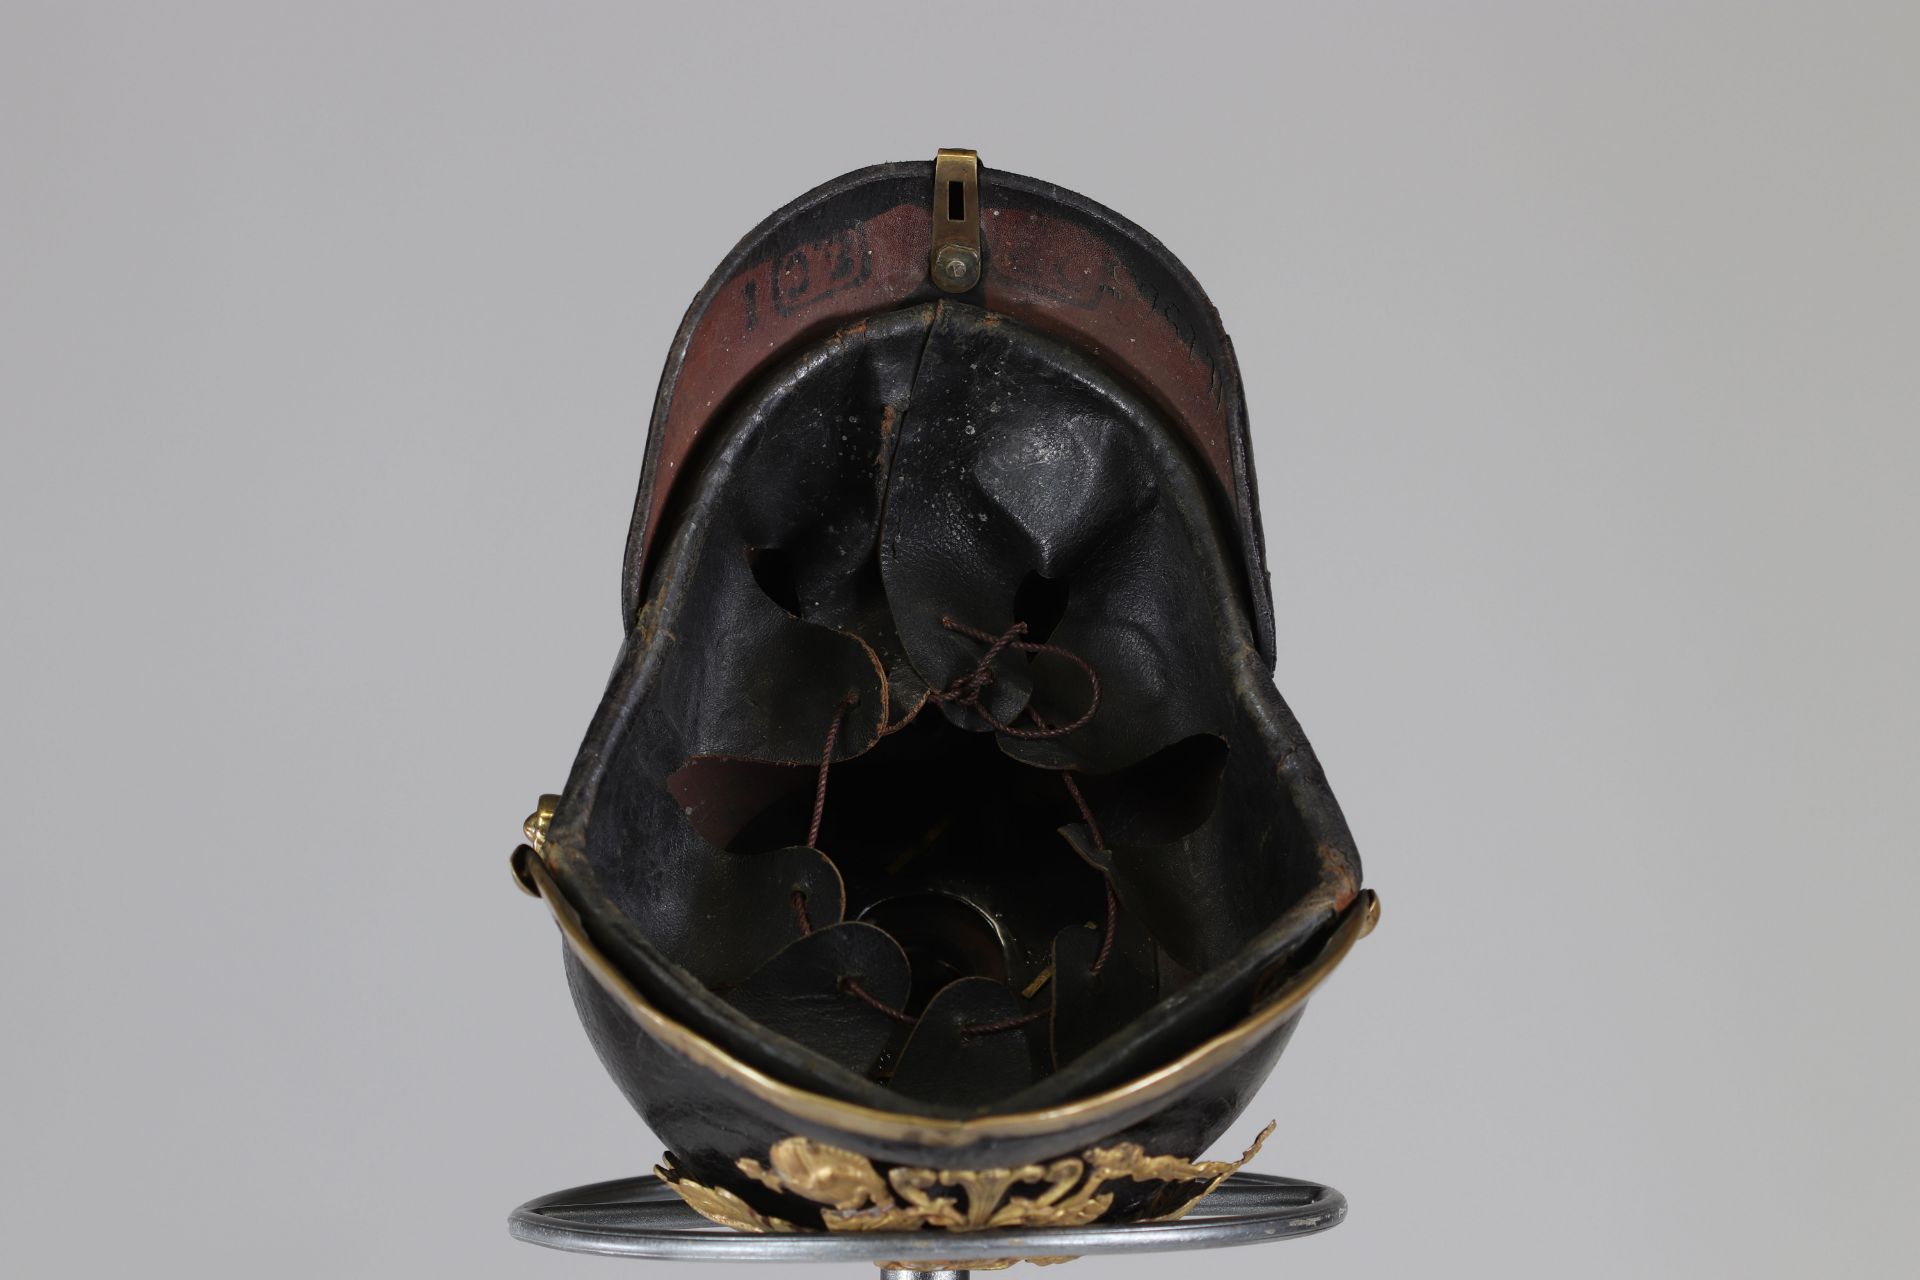 German 14-18 infantry helmet with protective cover - Image 6 of 6